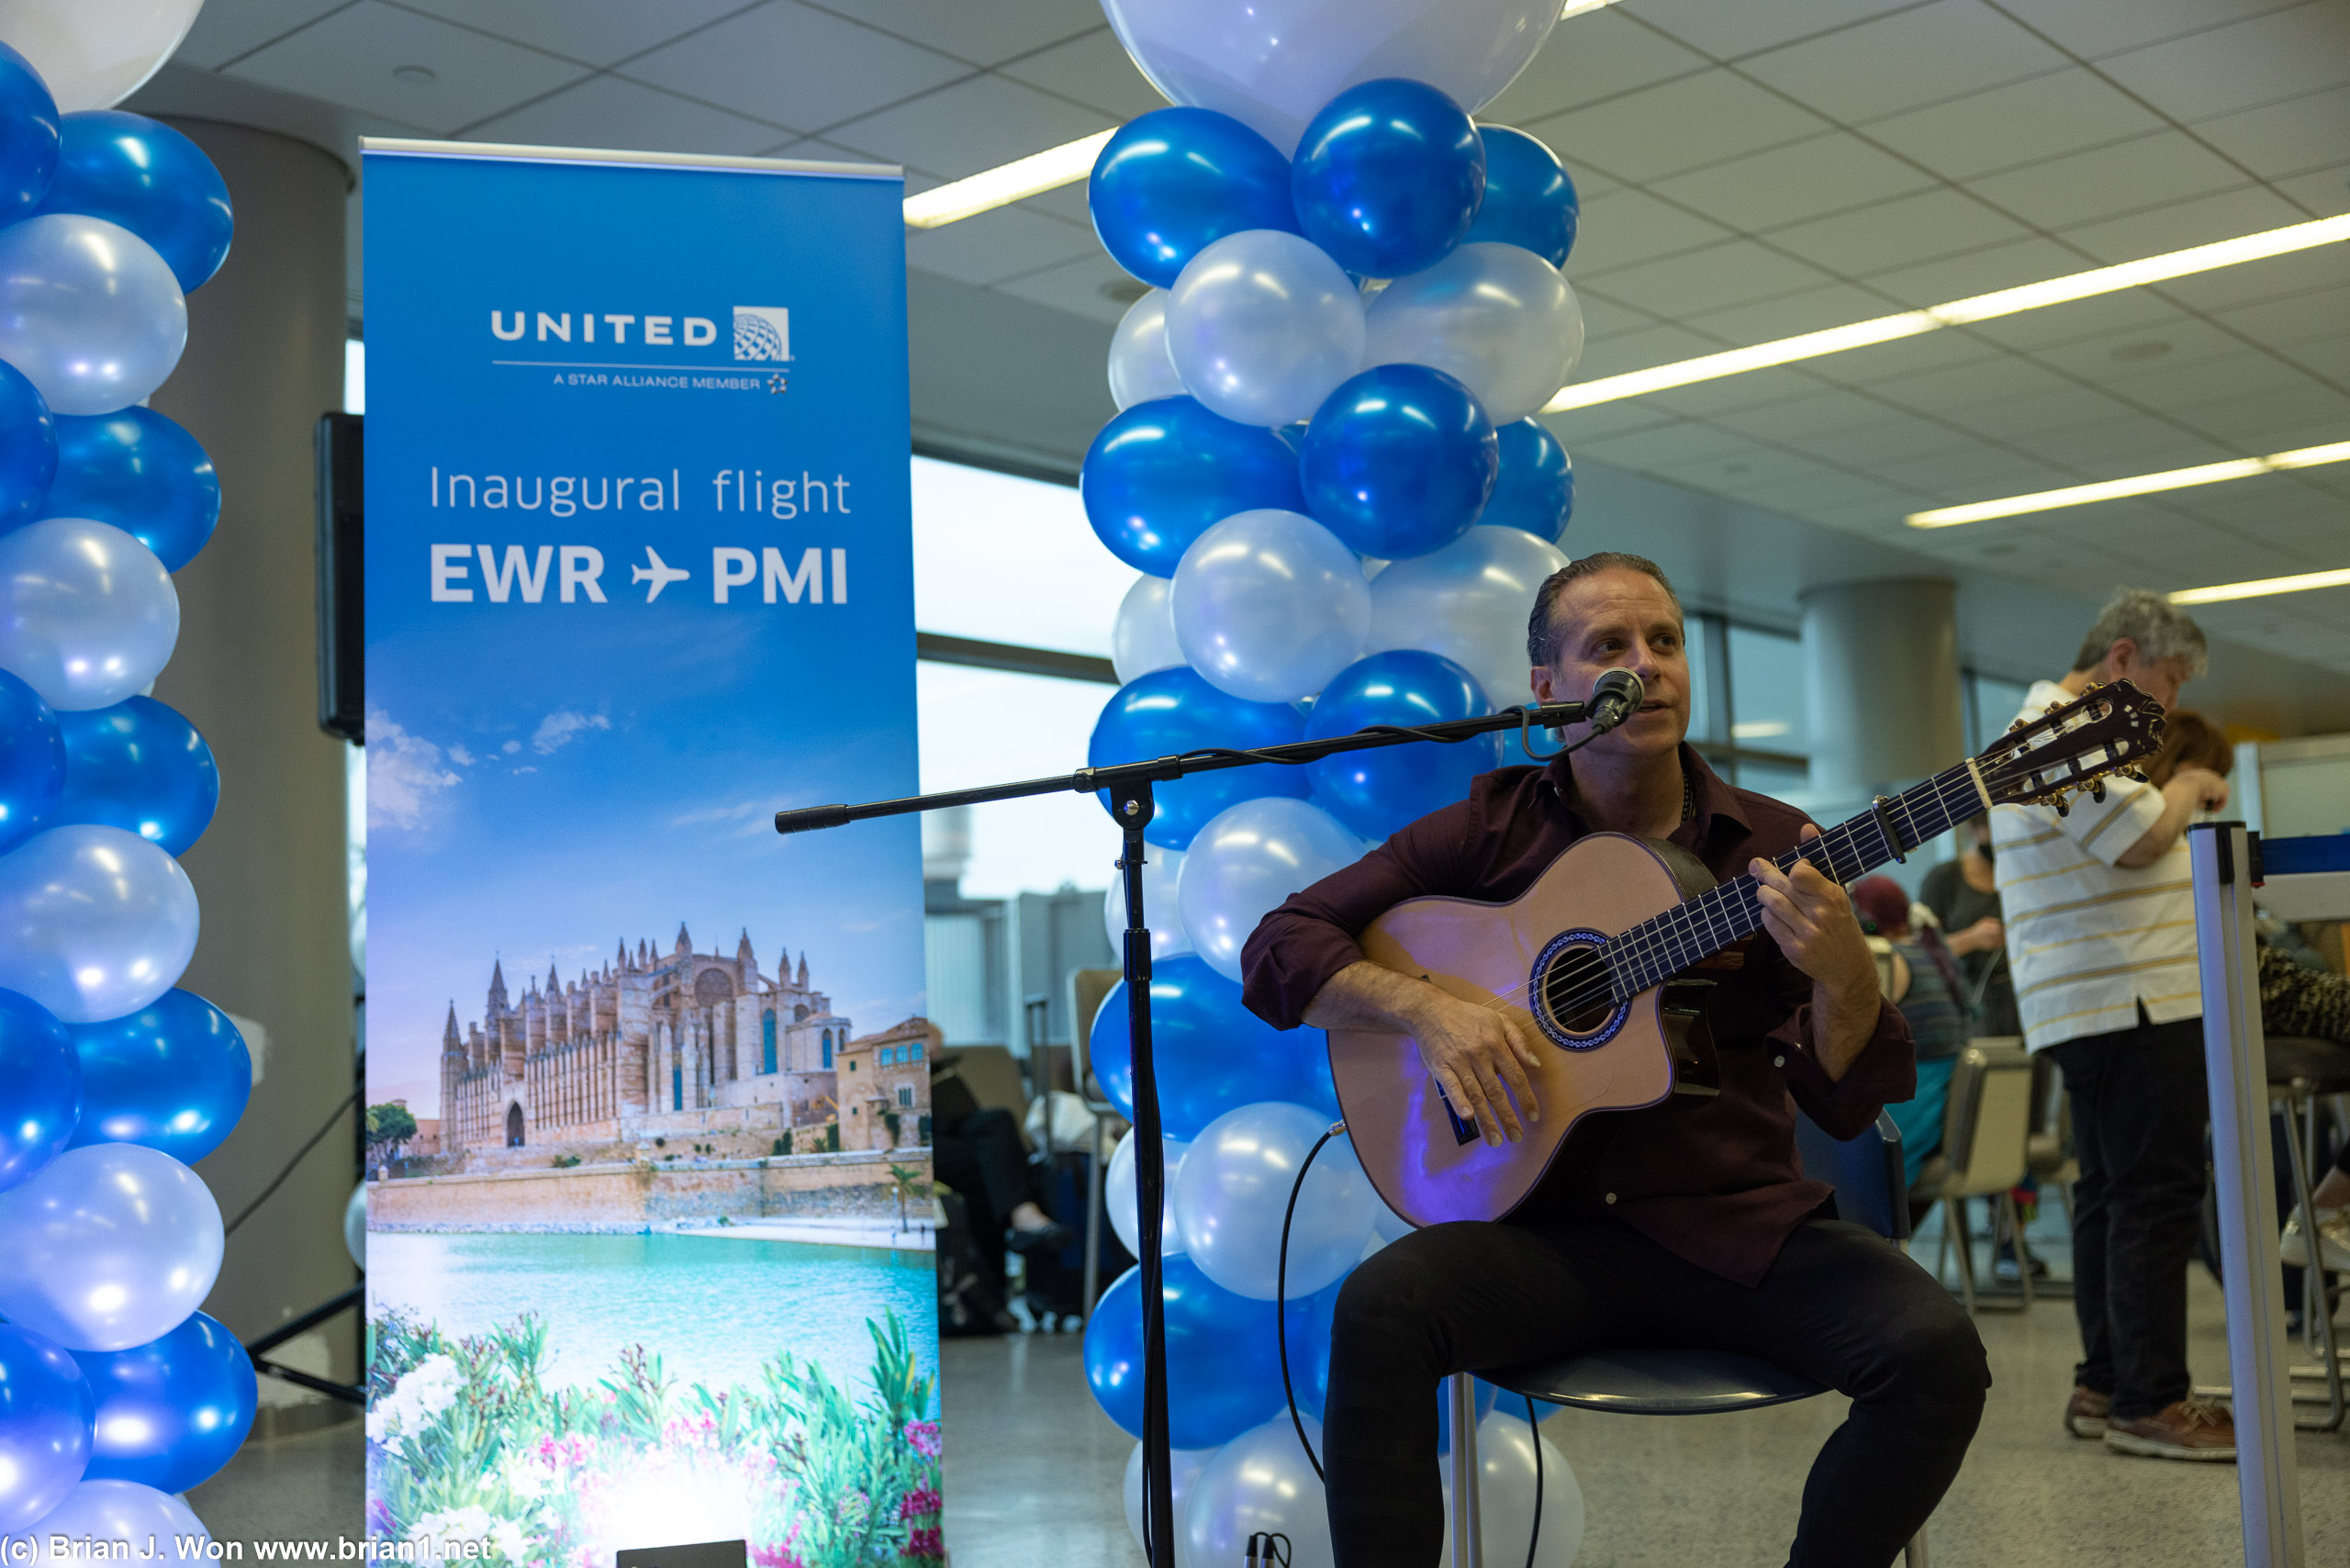 Given every flight was delayed, the musician got some extra playing time.